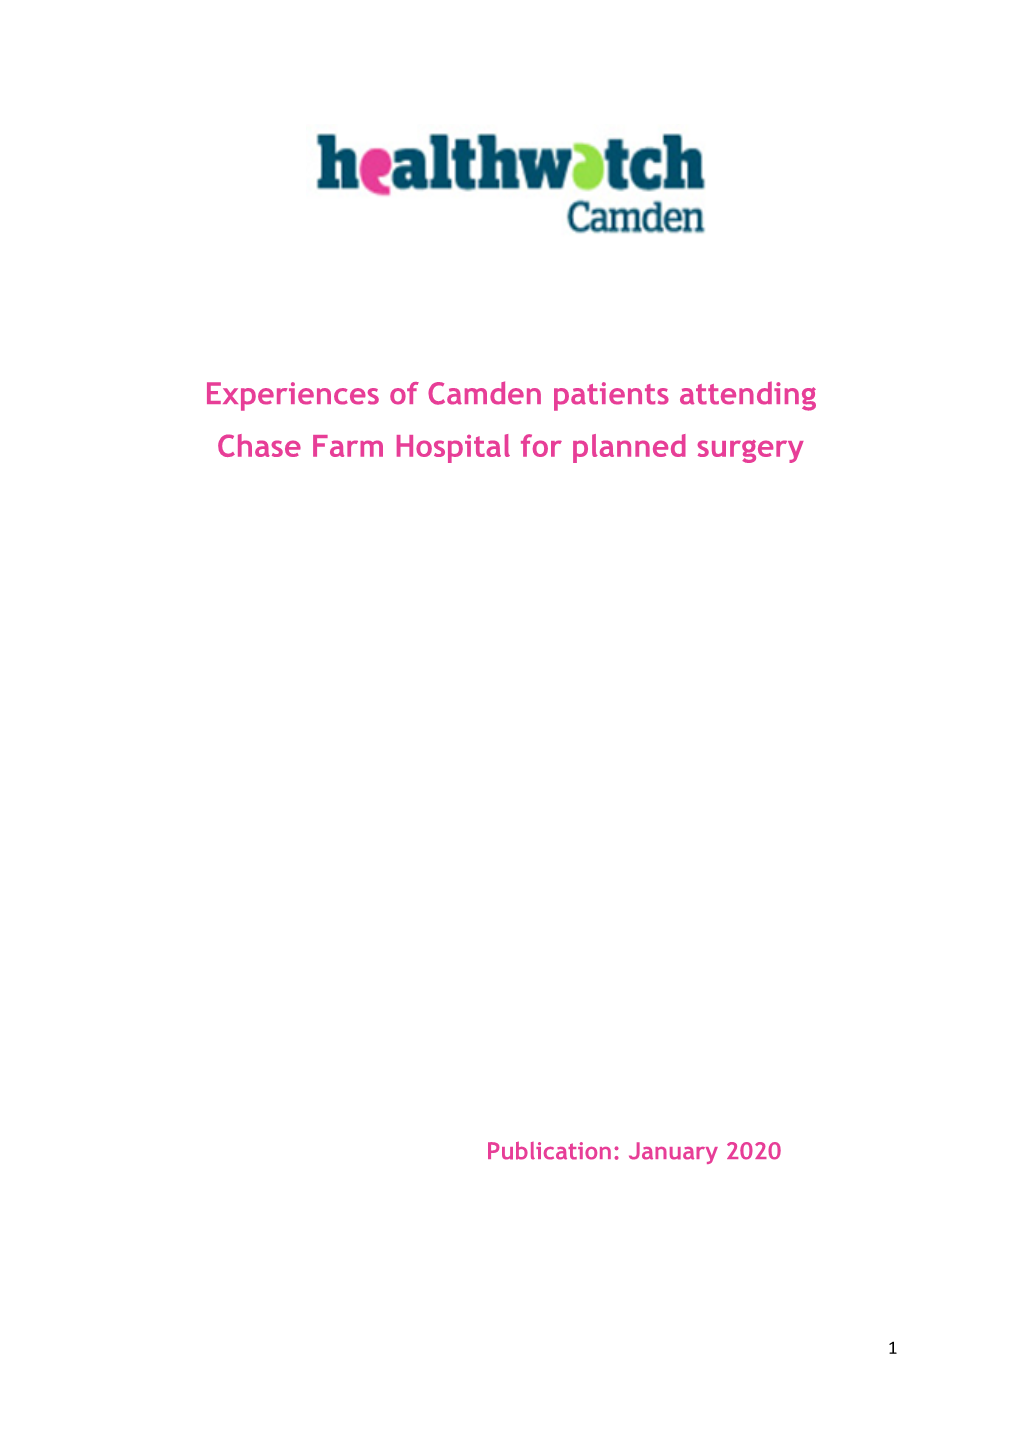 Experiences of Camden Patients Attending Chase Farm Hospital for Planned Surgery